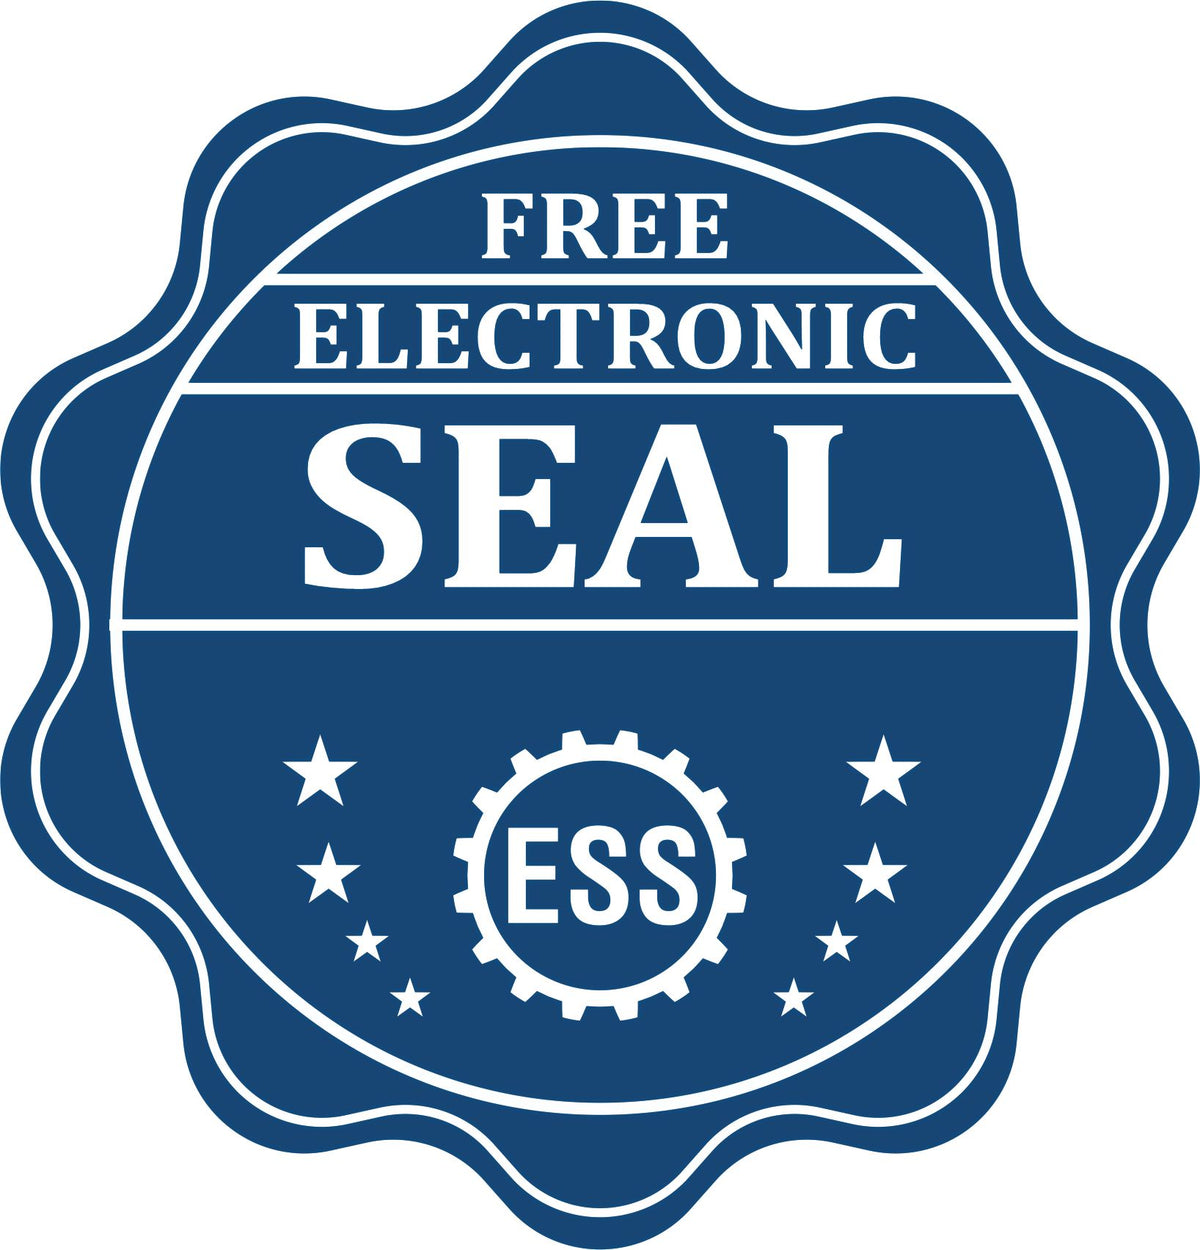 A badge showing a free electronic seal for the Slim Pre-Inked North Carolina Landscape Architect Seal Stamp with stars and the ESS gear on the emblem.